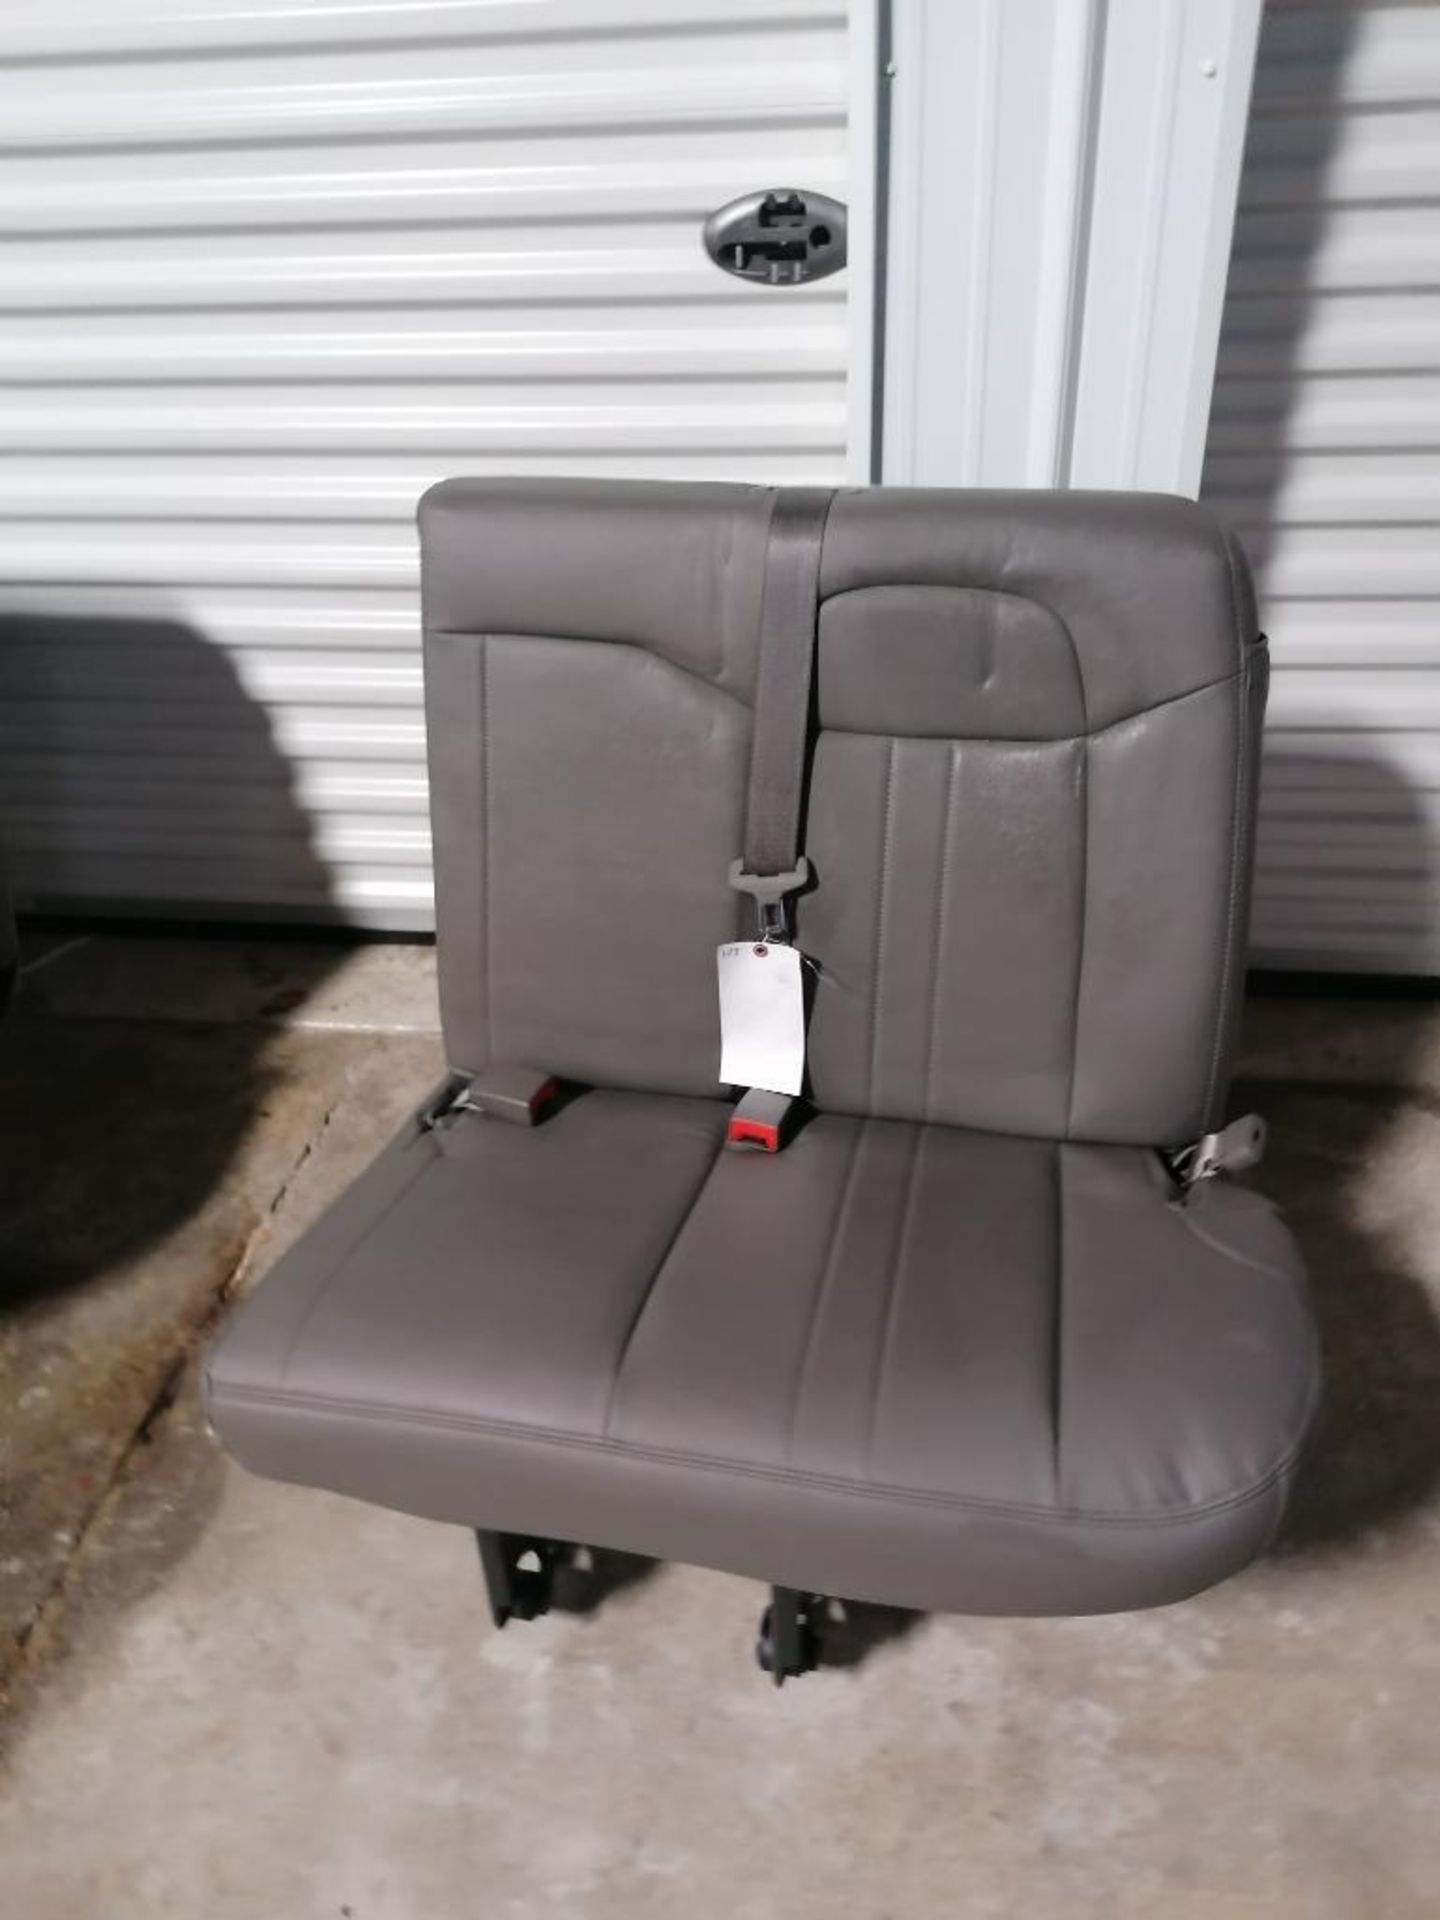 NEW 2021 Chevrolet Express Passenger Right Seat. Located in Mt. Pleasant, IA.